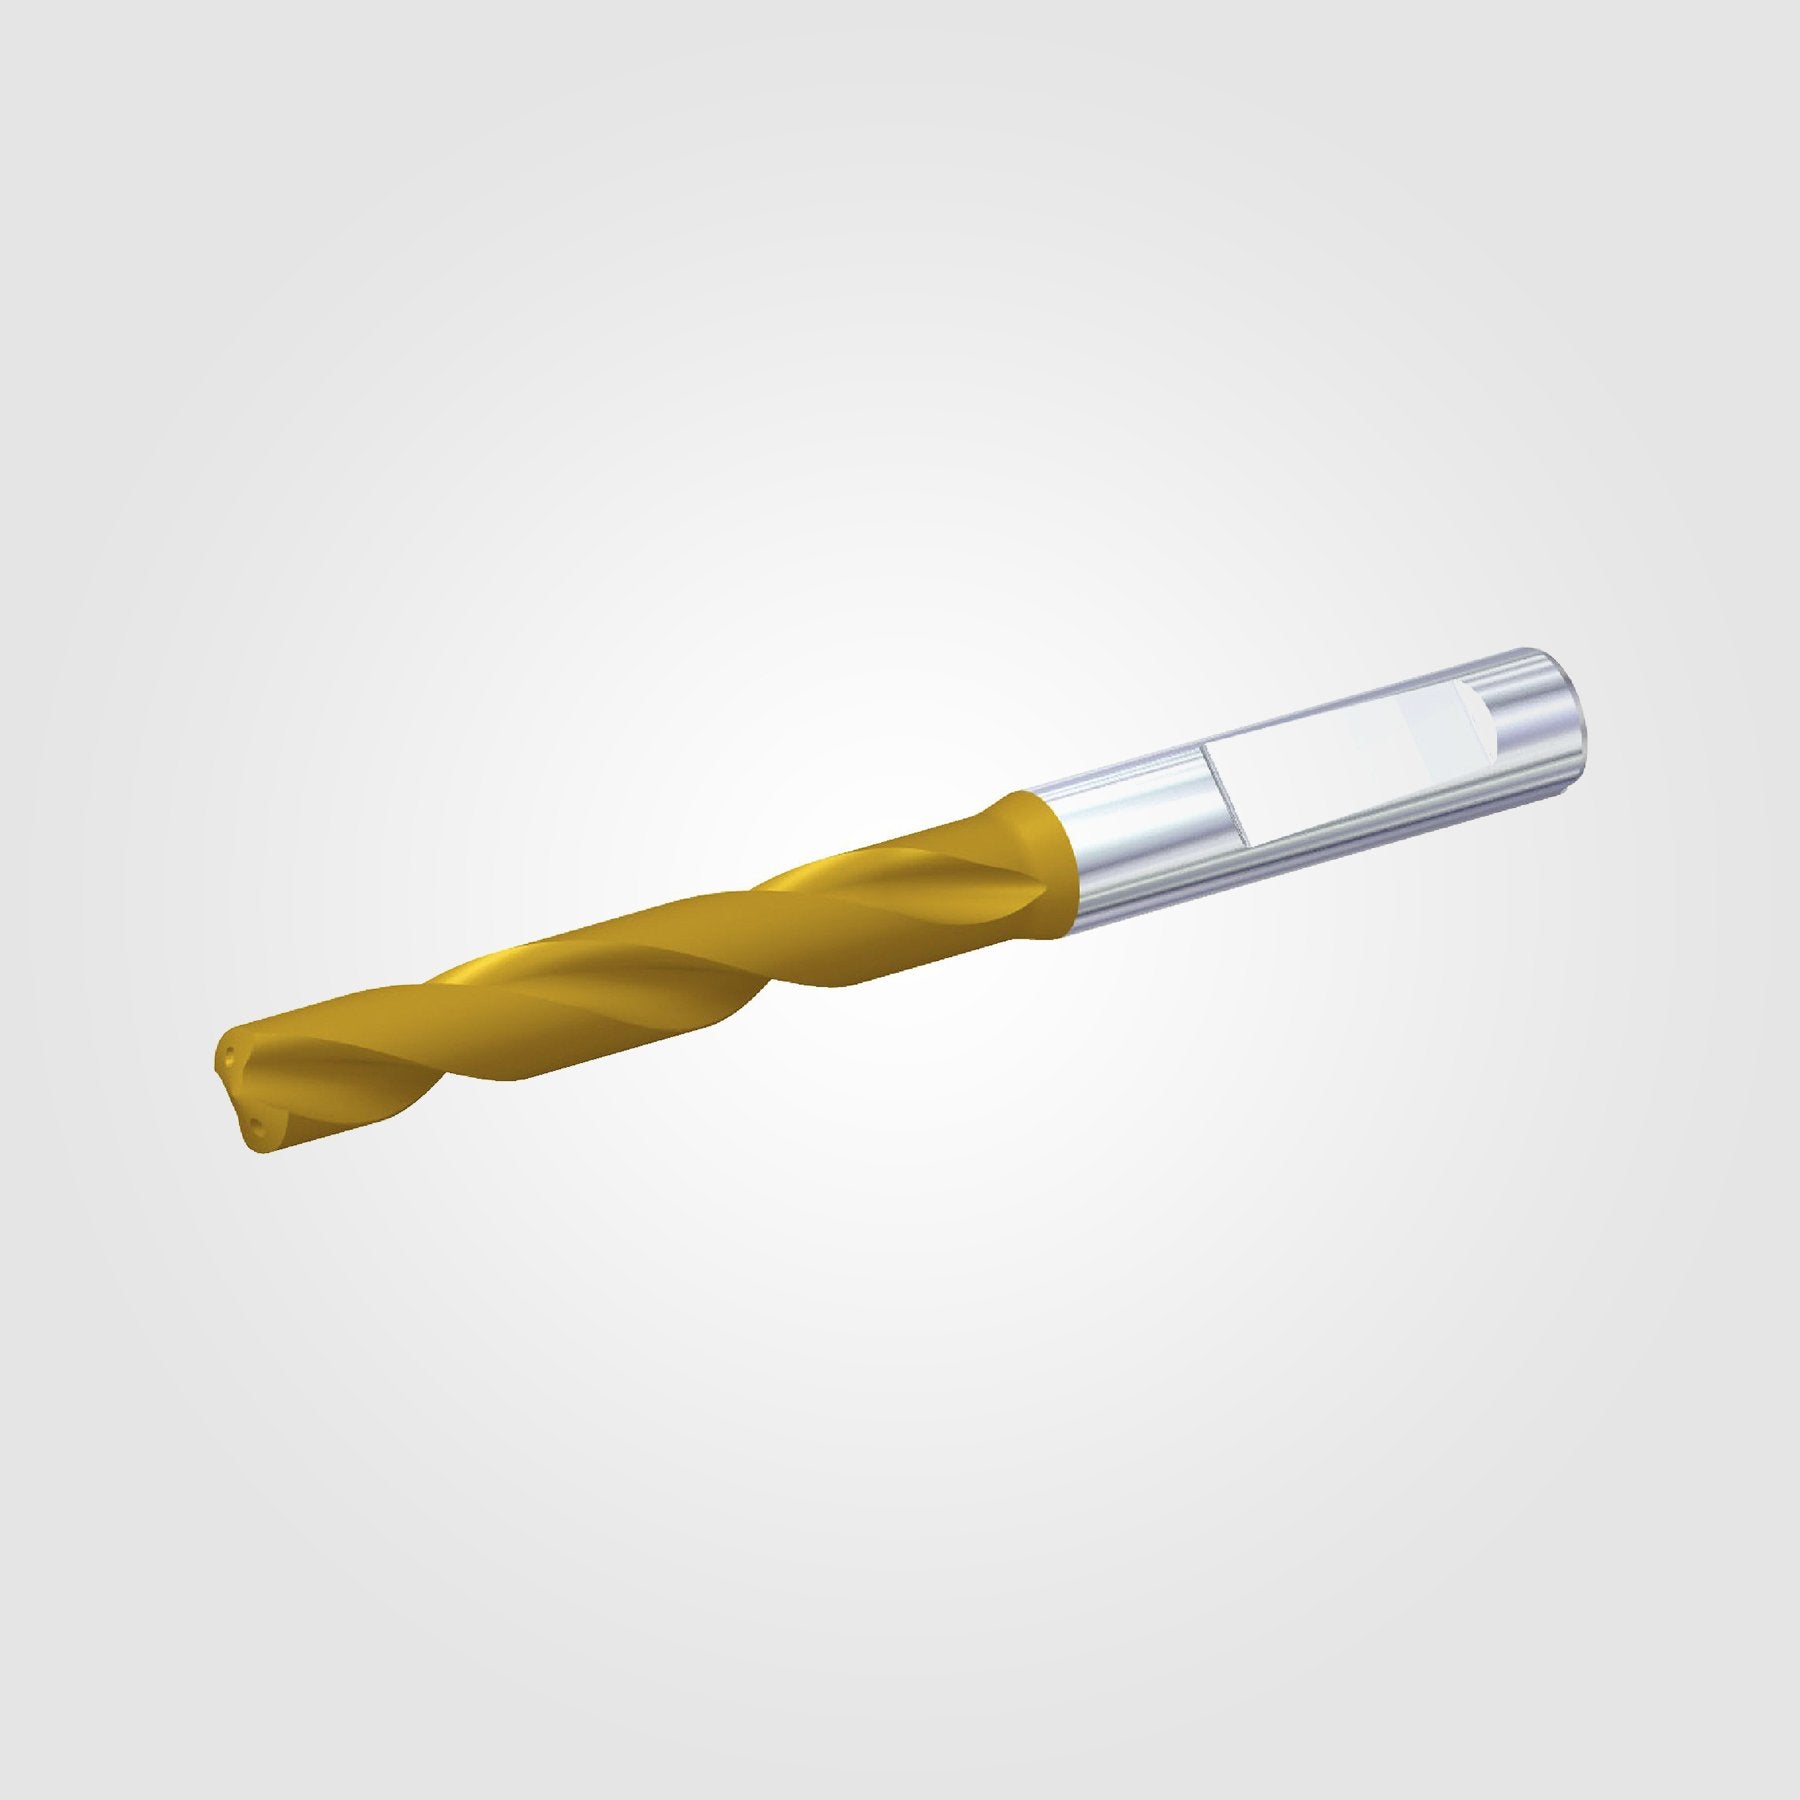 Kennametal: Solid Carbide Drill Bits for Stainless Steel